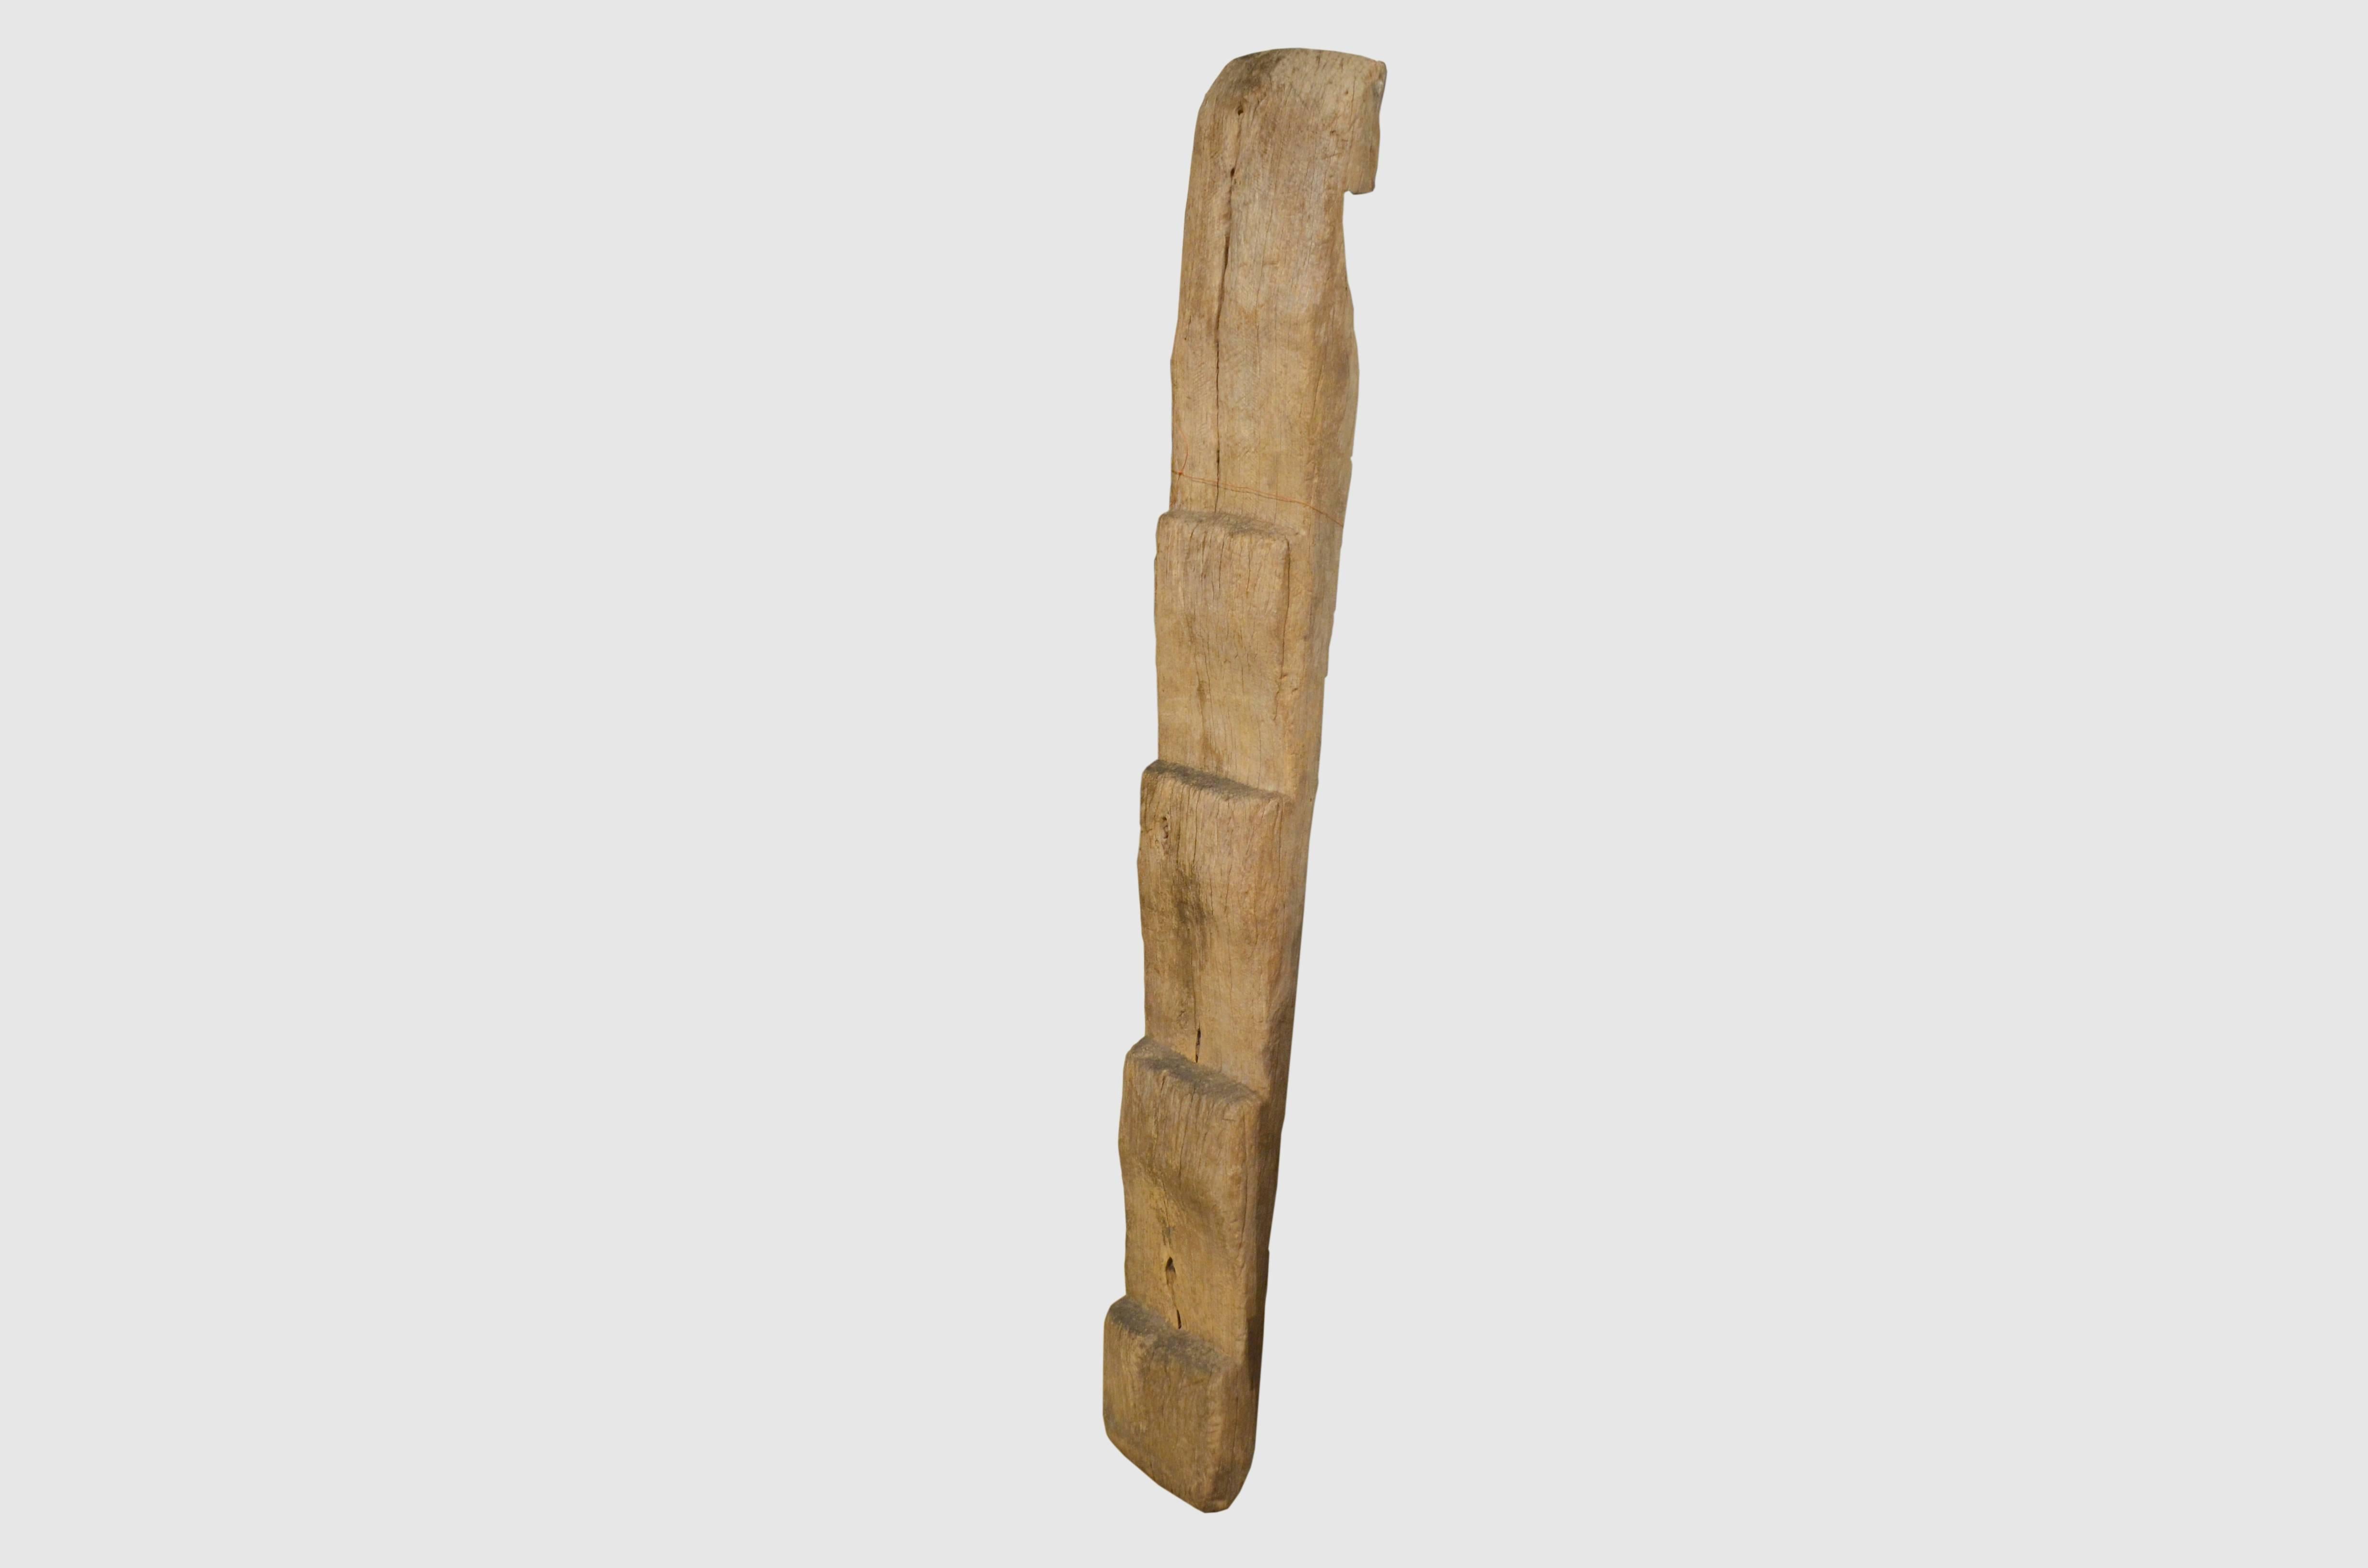 Primitive teak wood ladder hand-carved from a single slab. For the Primitive collector.

This ladder was sourced in the spirit of wabi-sabi, a Japanese philosophy that beauty can be found in imperfection and impermanence. It’s a beauty of things